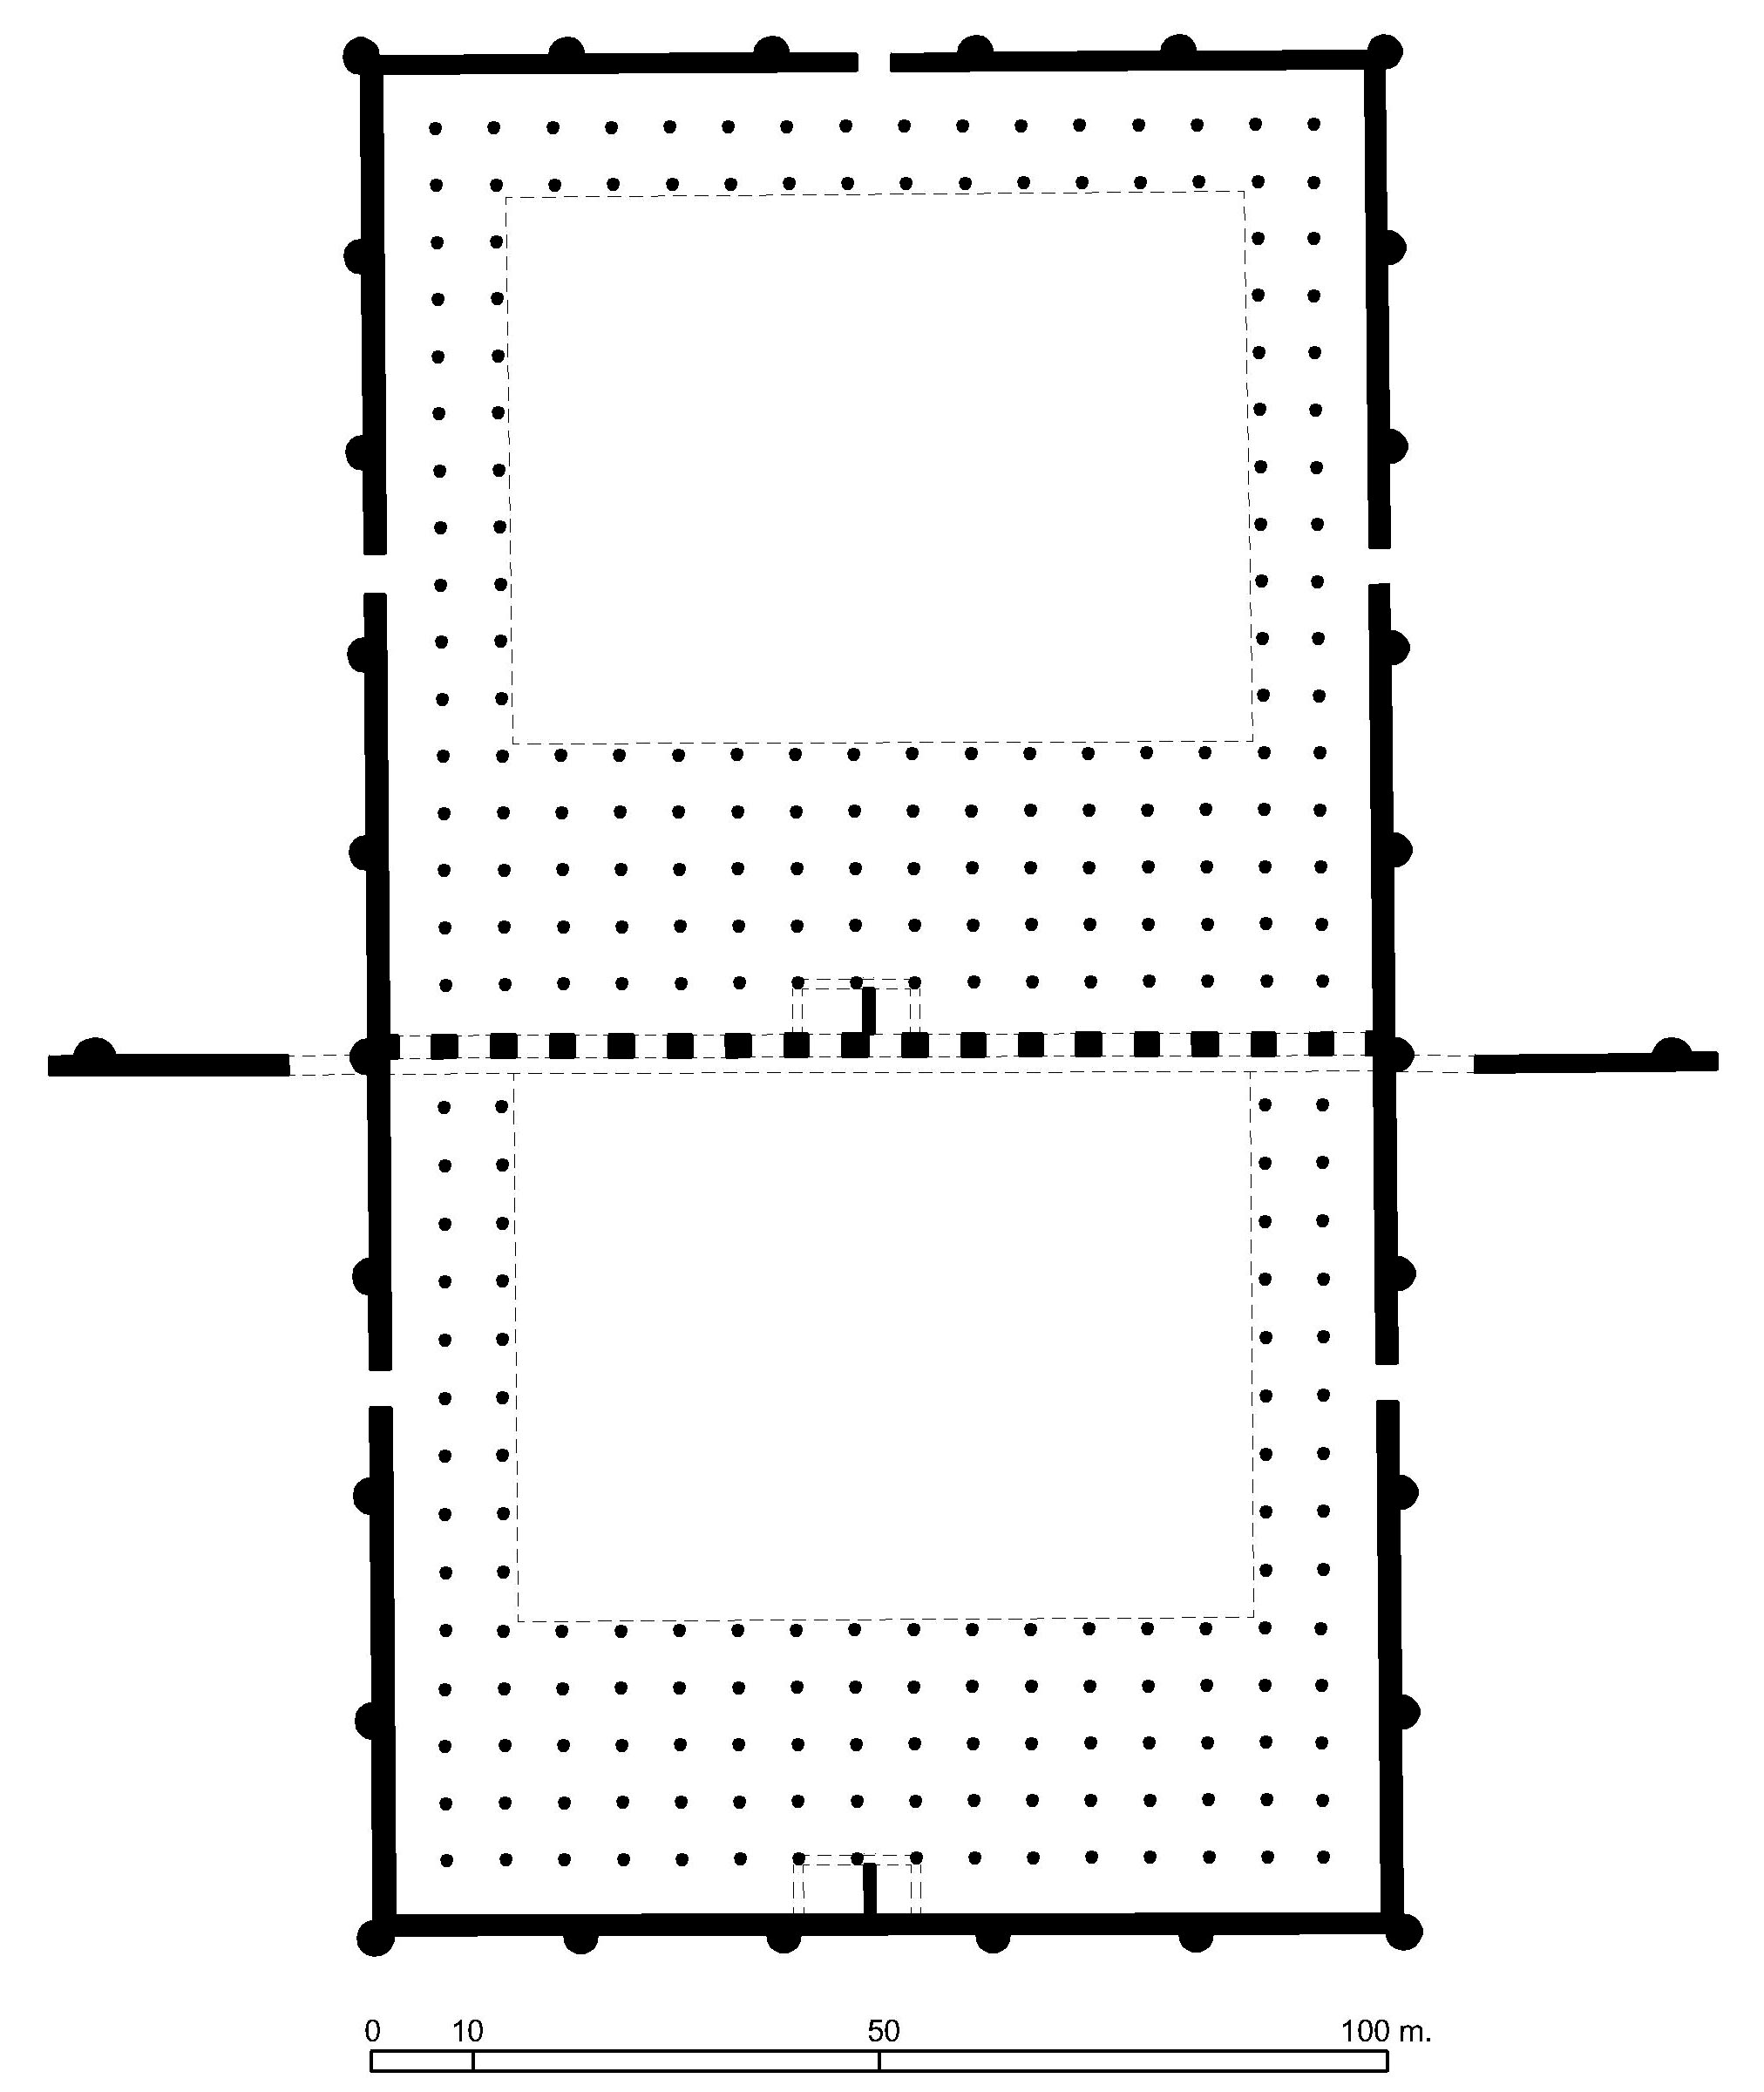 Jami' al-Mansur - Floor plan of mosque in AutoCAD 2000 format. Click the download button to download a zipped file containing the .dwg file. 